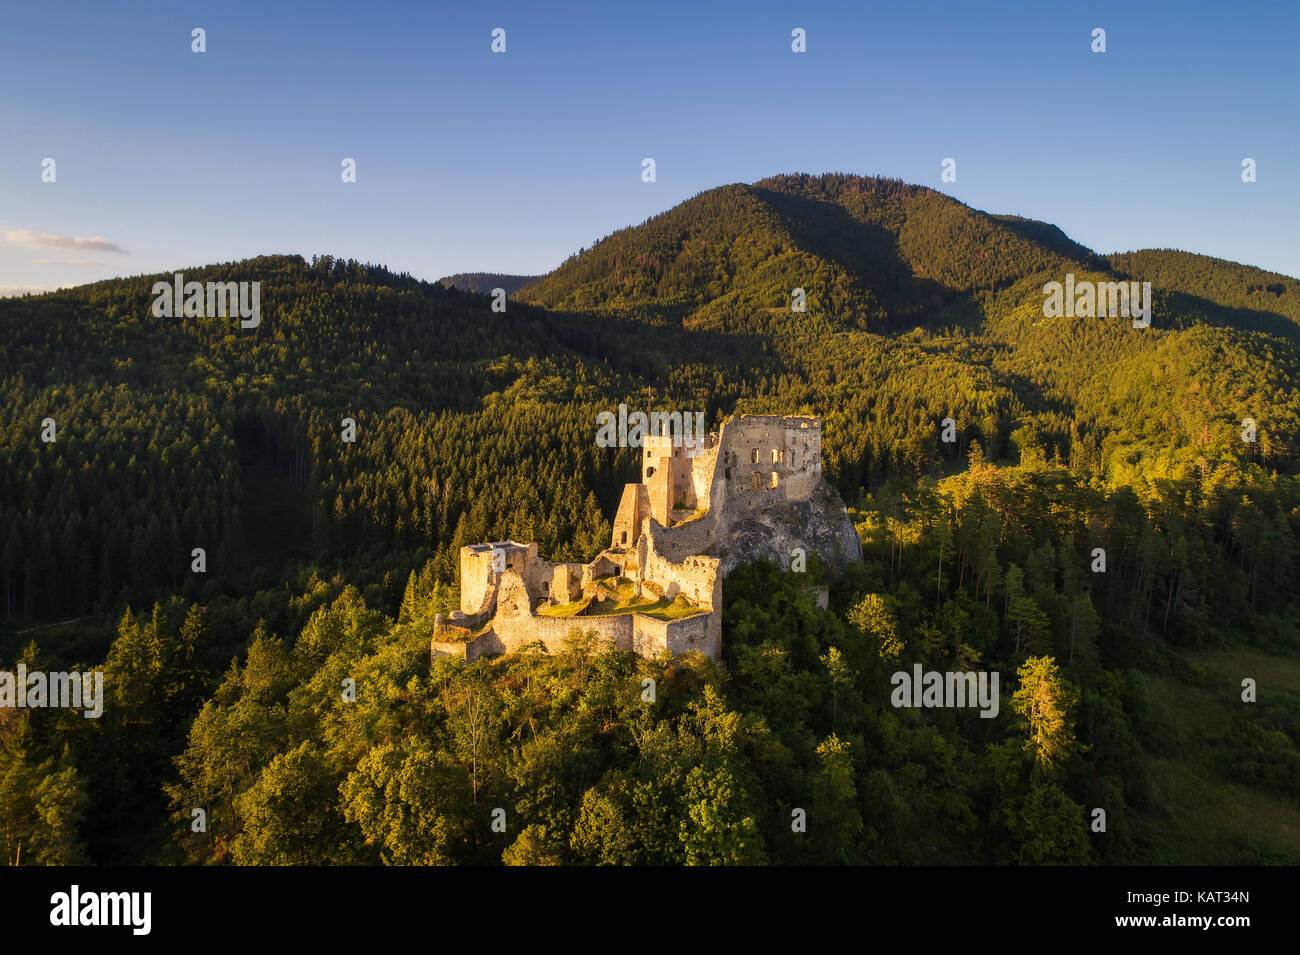 Abandoned ruins of a medieval castle in the golden evening light at sunset Stock Photo